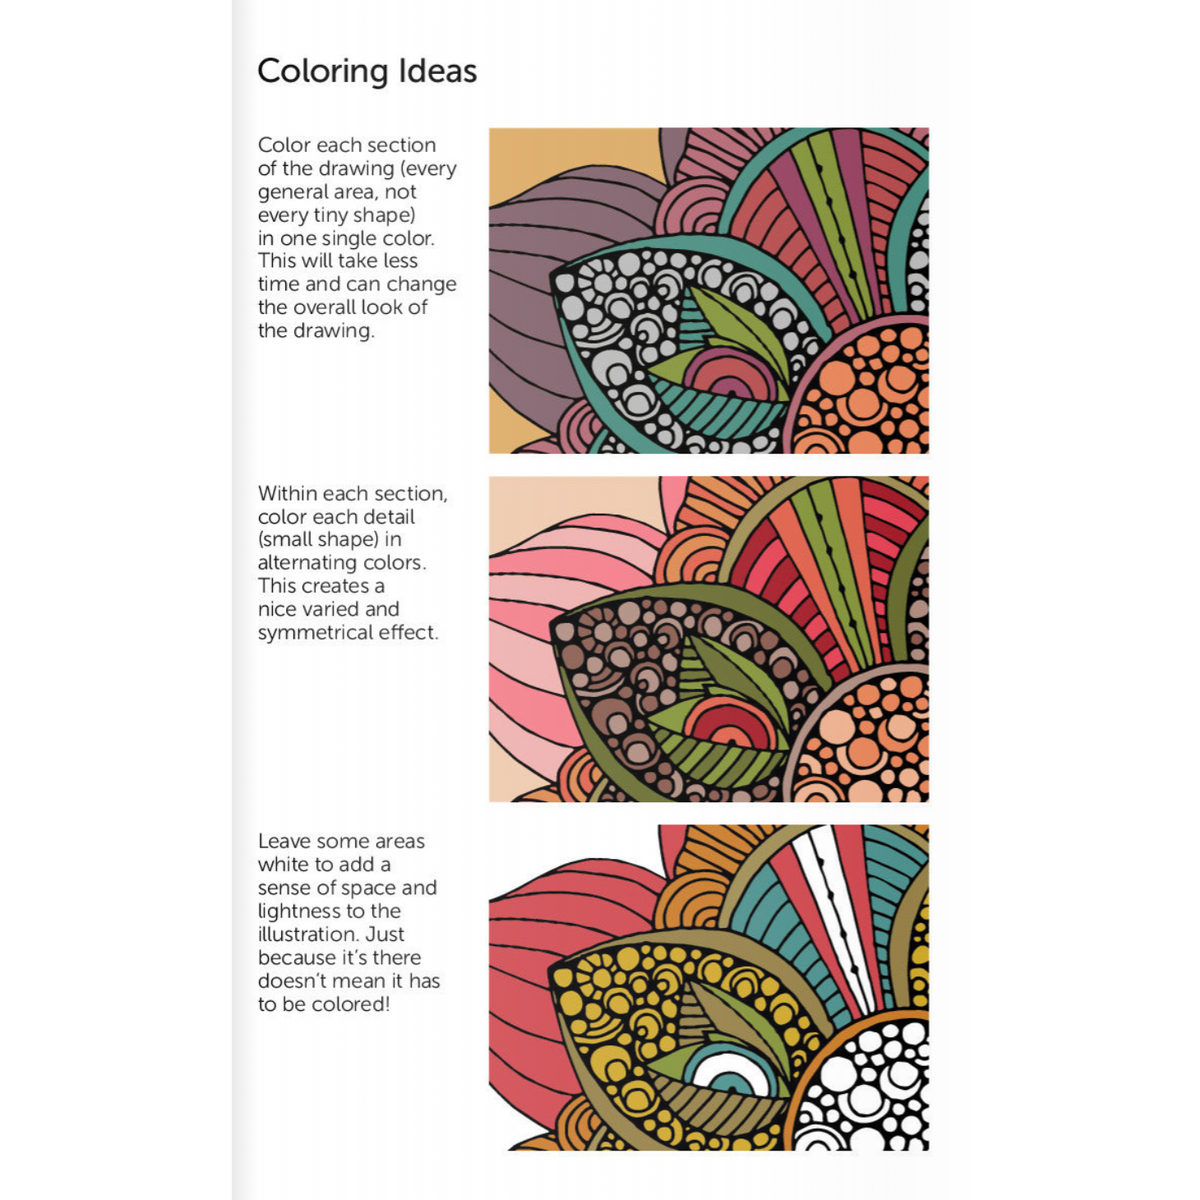 Coloring Book - Color Relax - Pocket Sized-Arts &amp; Humanities-Yellow Springs Toy Company